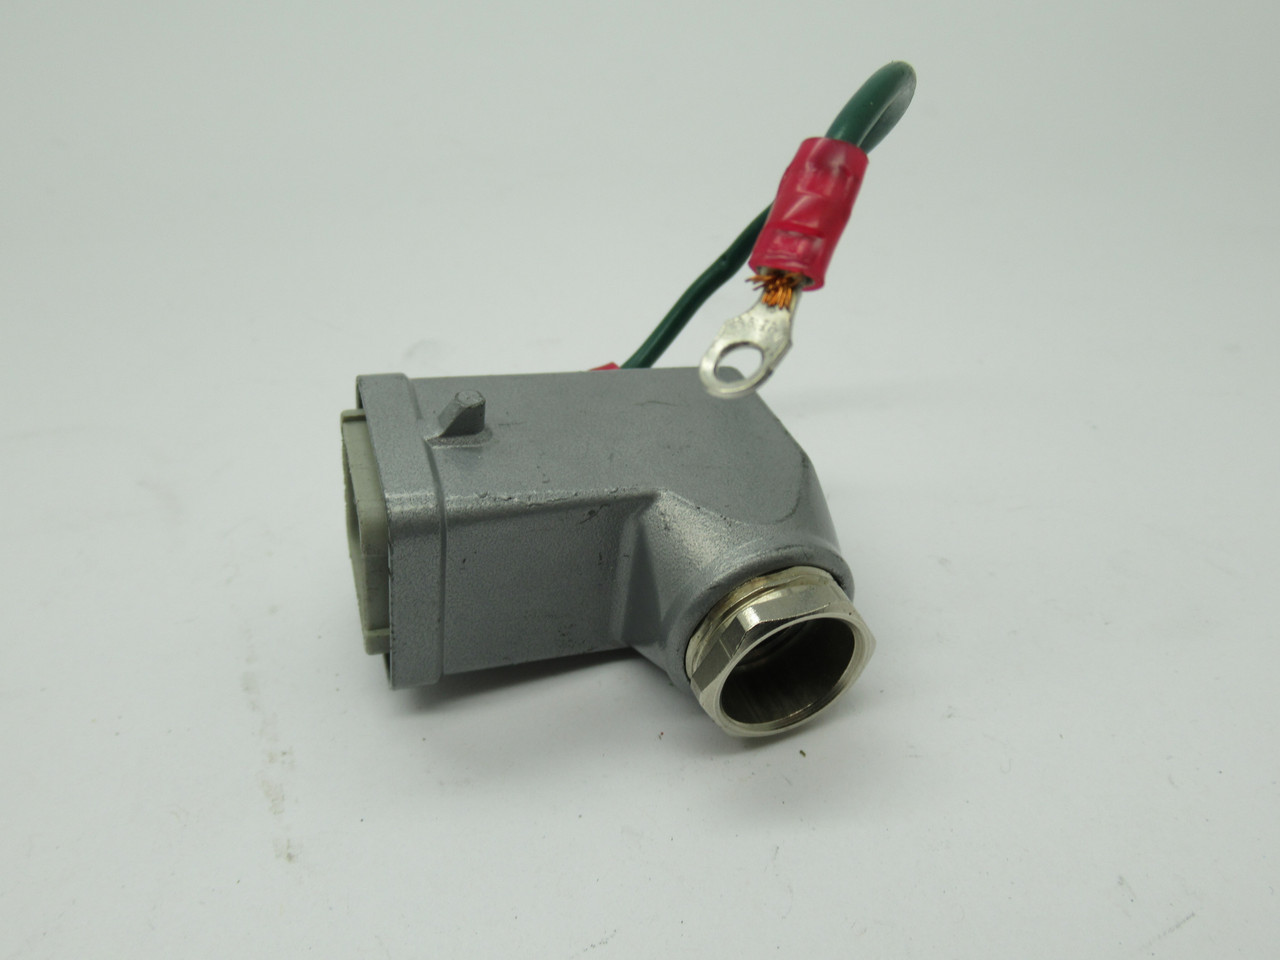 Lapp H-A4SS 10431000 Connector With Housing 600V Wired USED